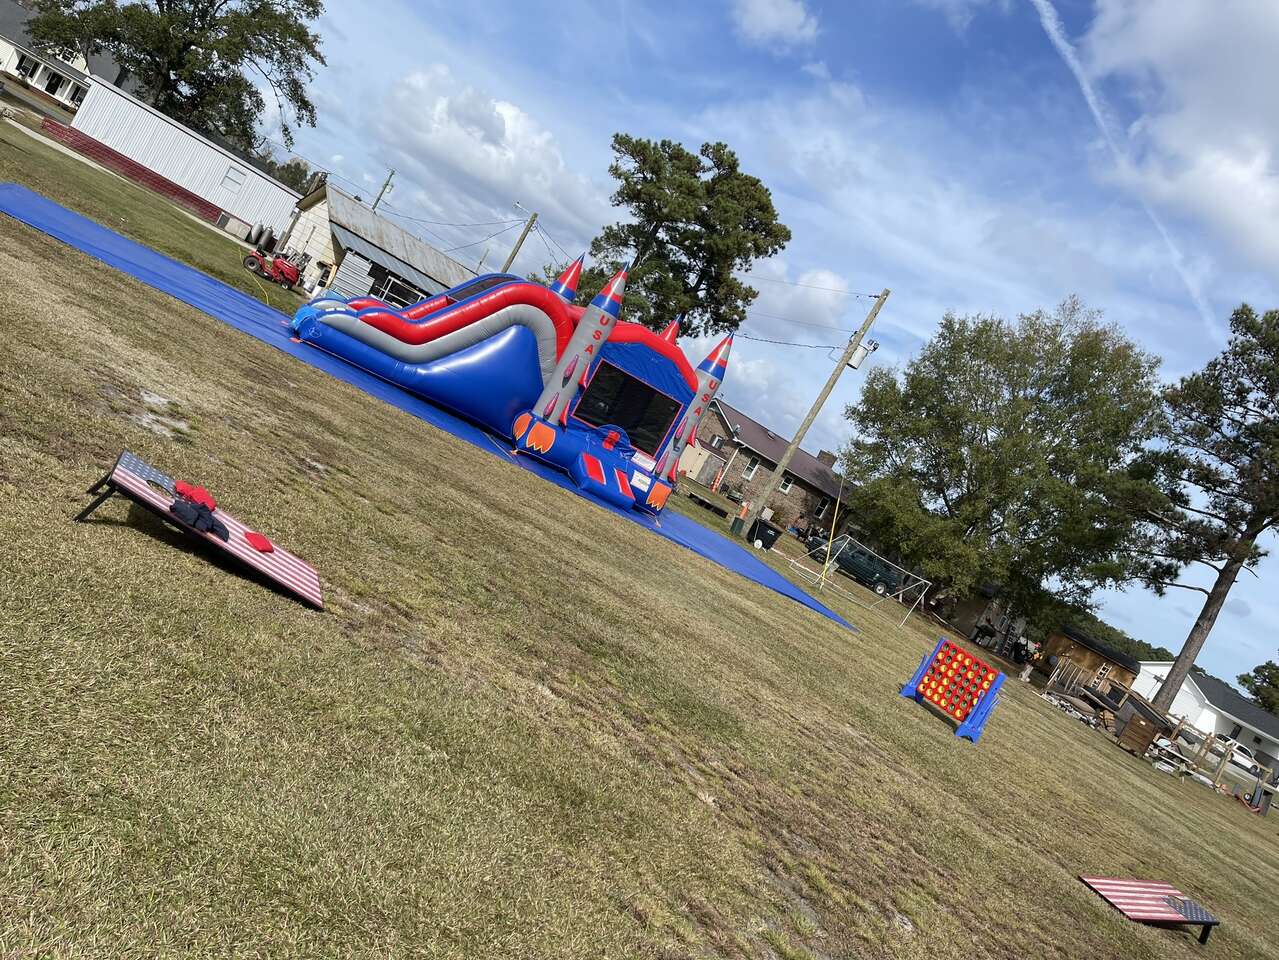 Rocketship inflatable bounce house and slide next to yard games